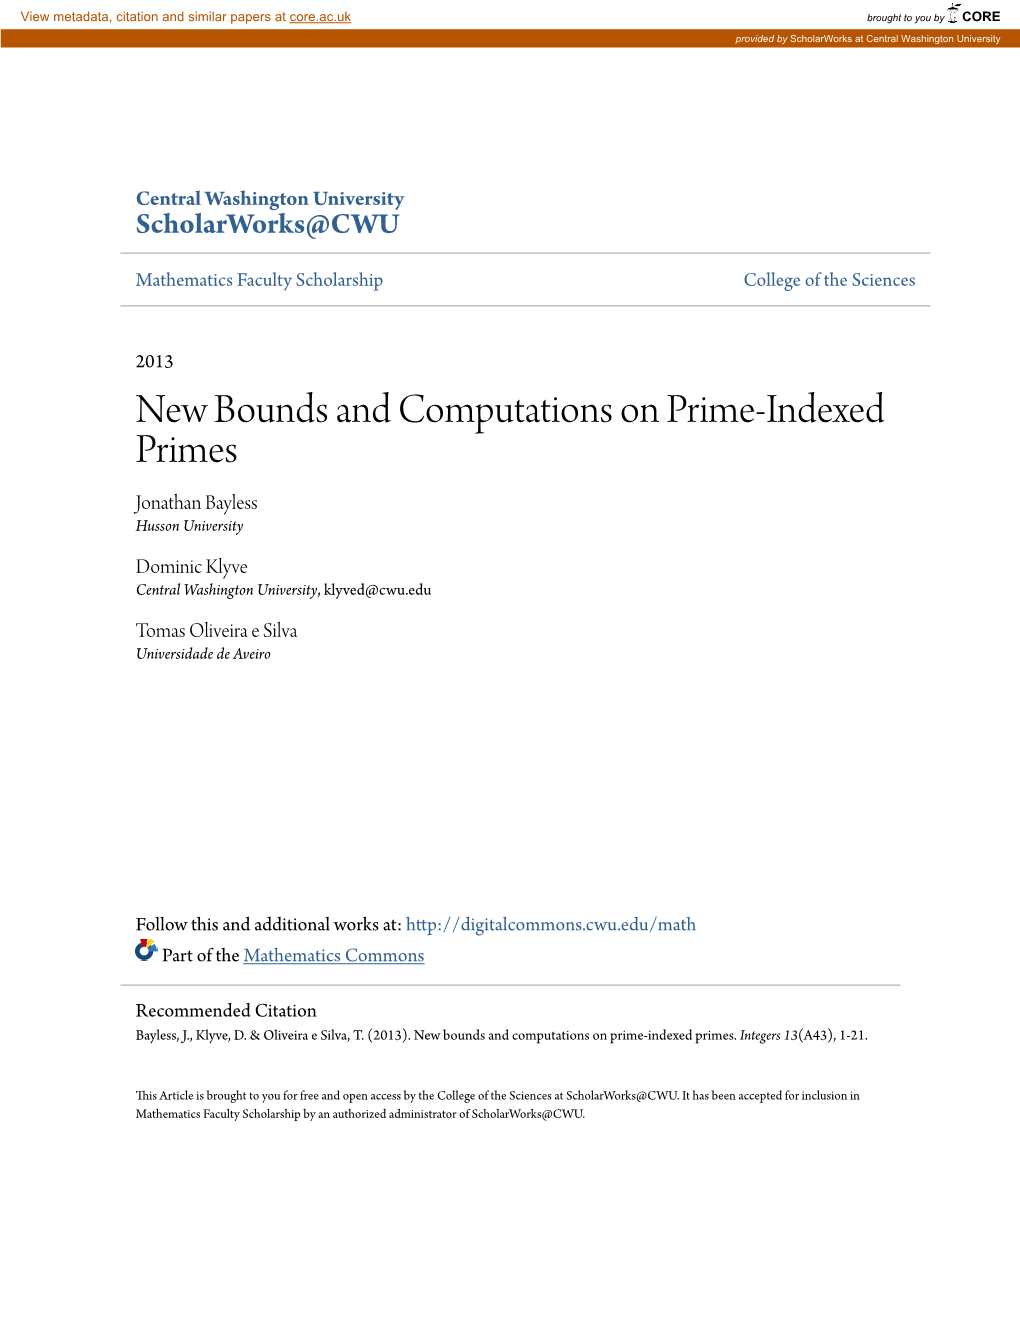 New Bounds and Computations on Prime-Indexed Primes Jonathan Bayless Husson University